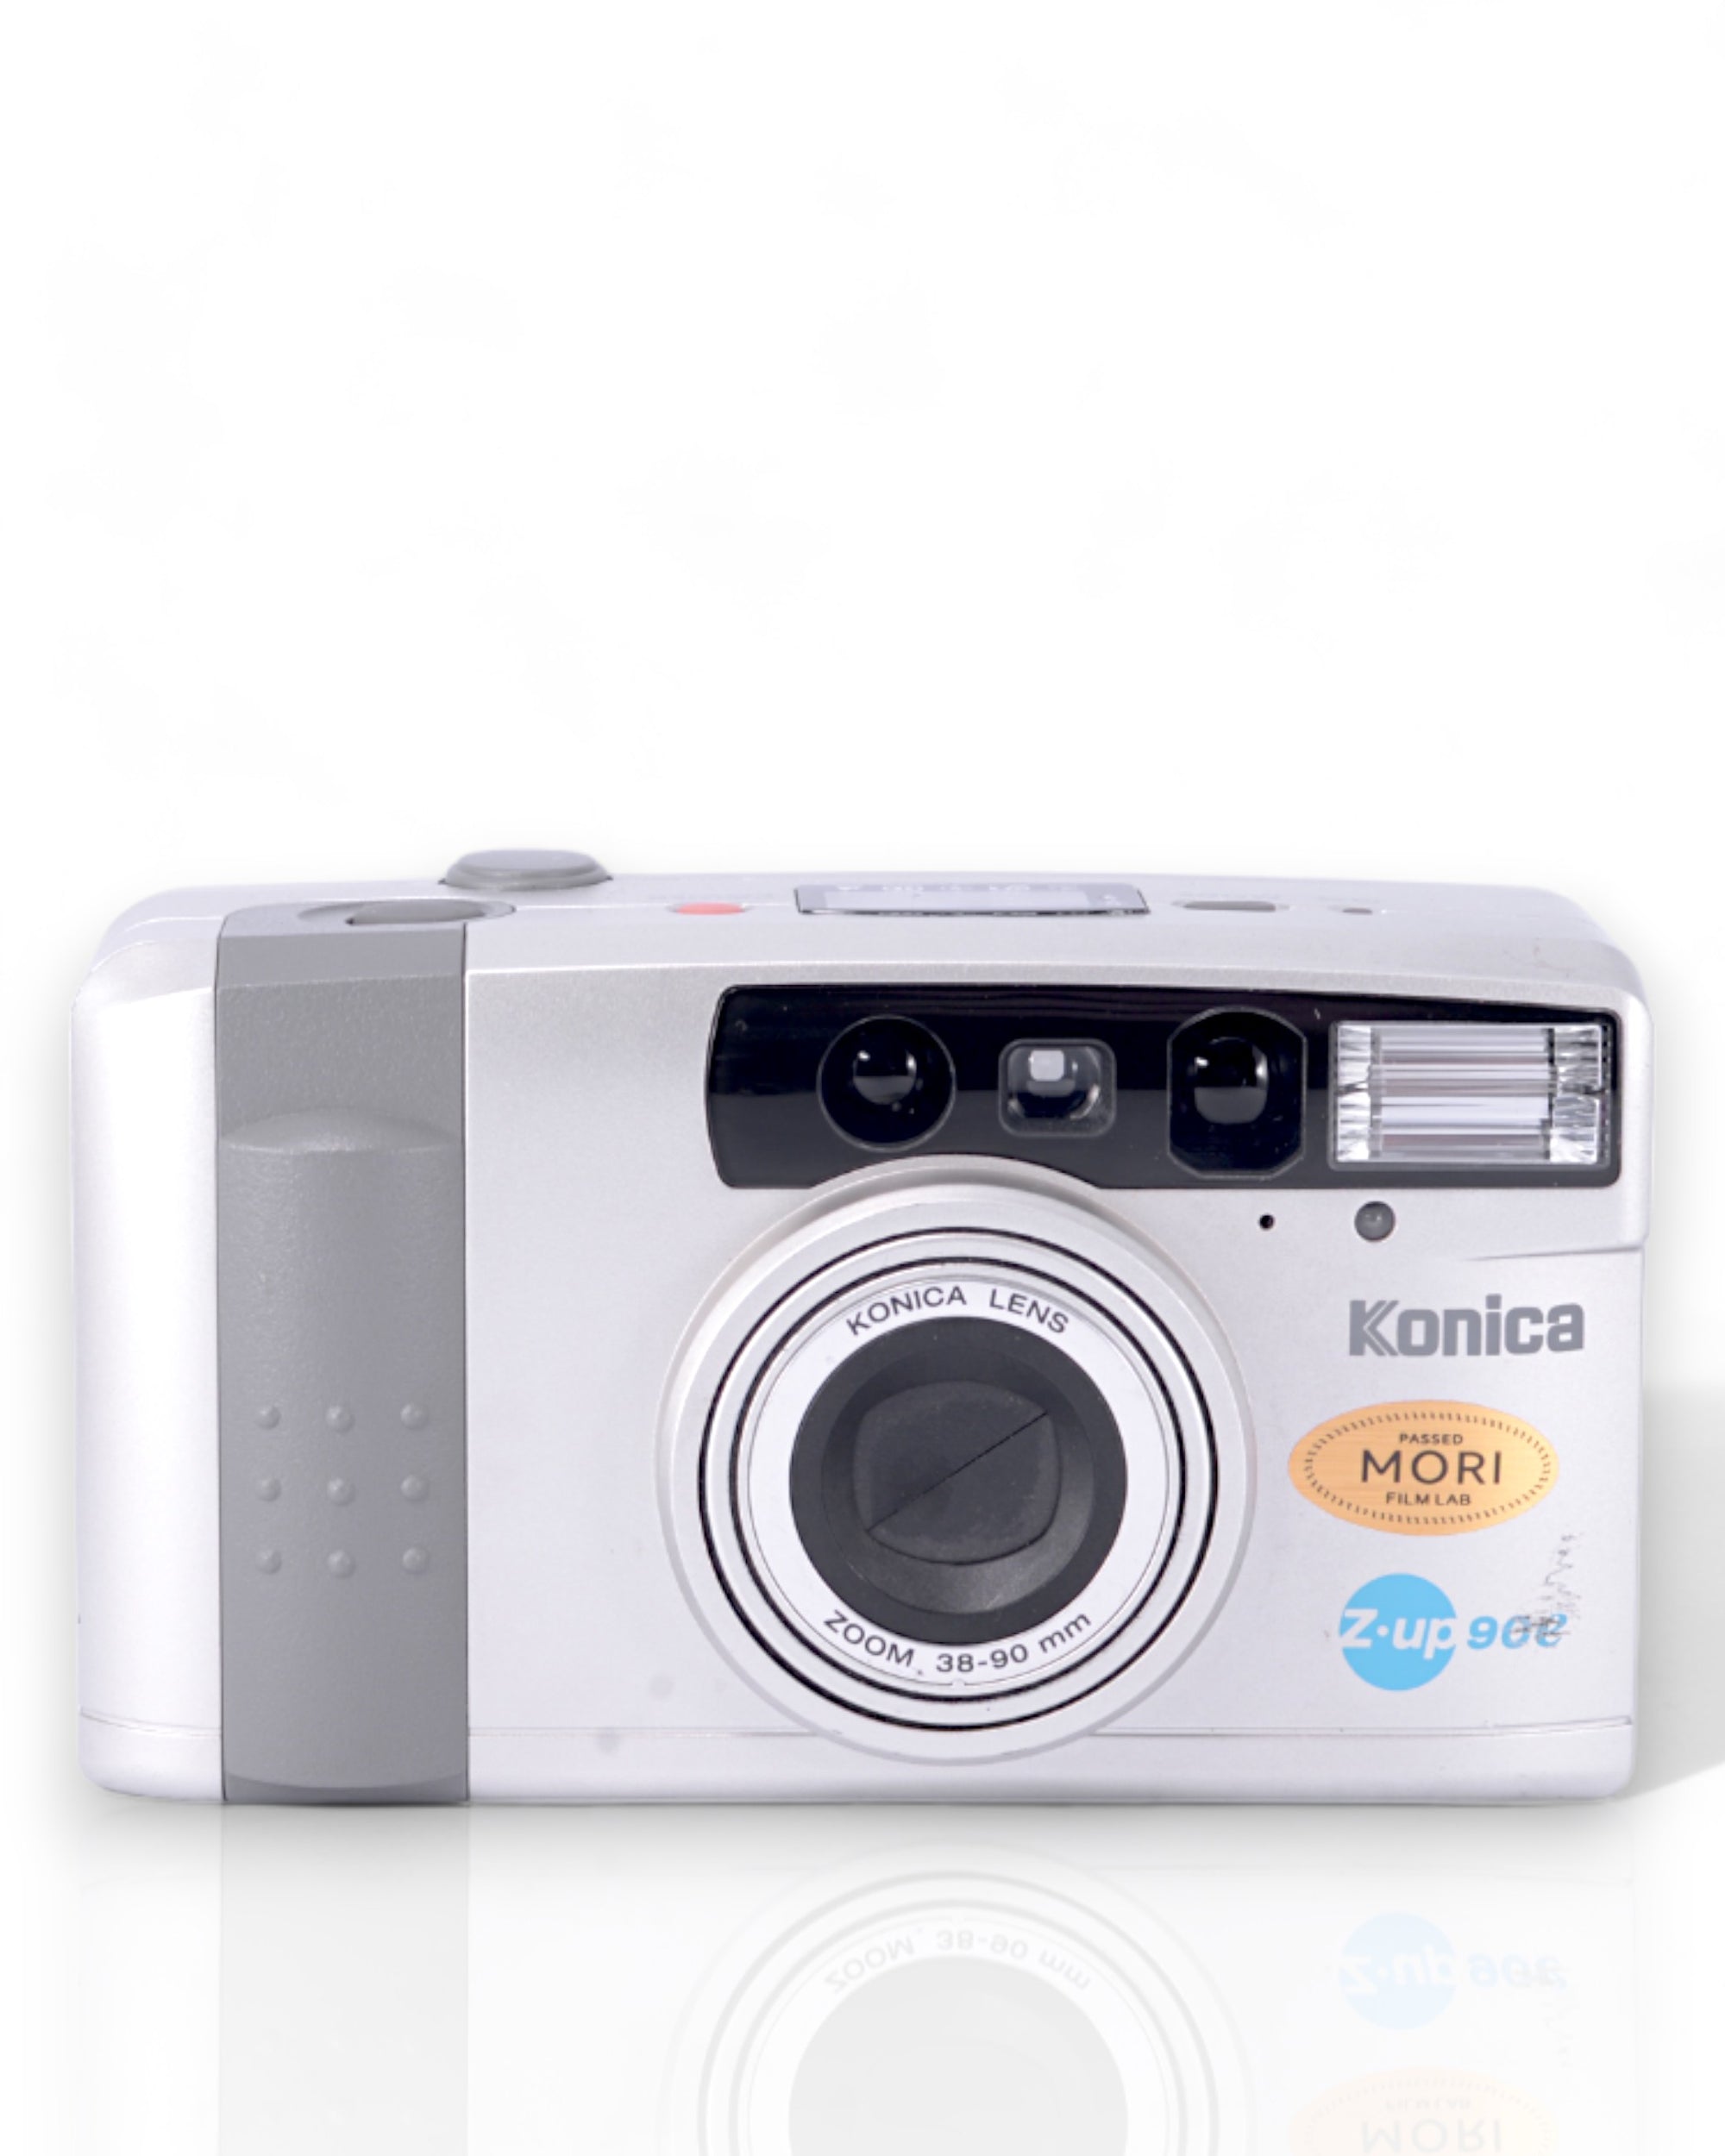 Konica Z-up 90e Zoom 35mm Point & Shoot film camera with 38-90mm Zoom lens